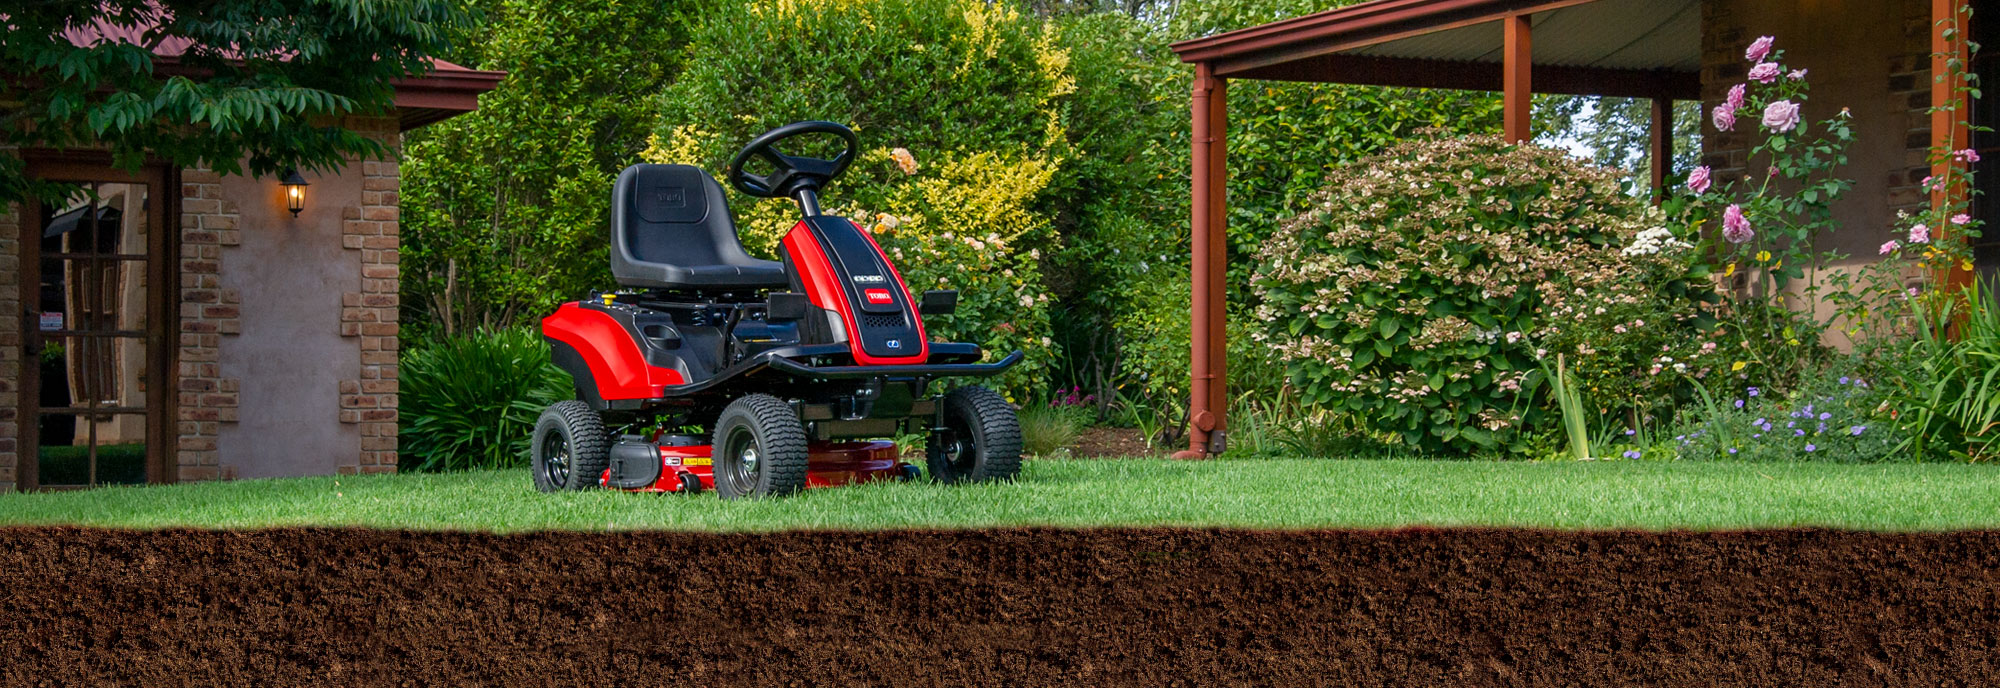 All new E Series battery powered ride-on mower